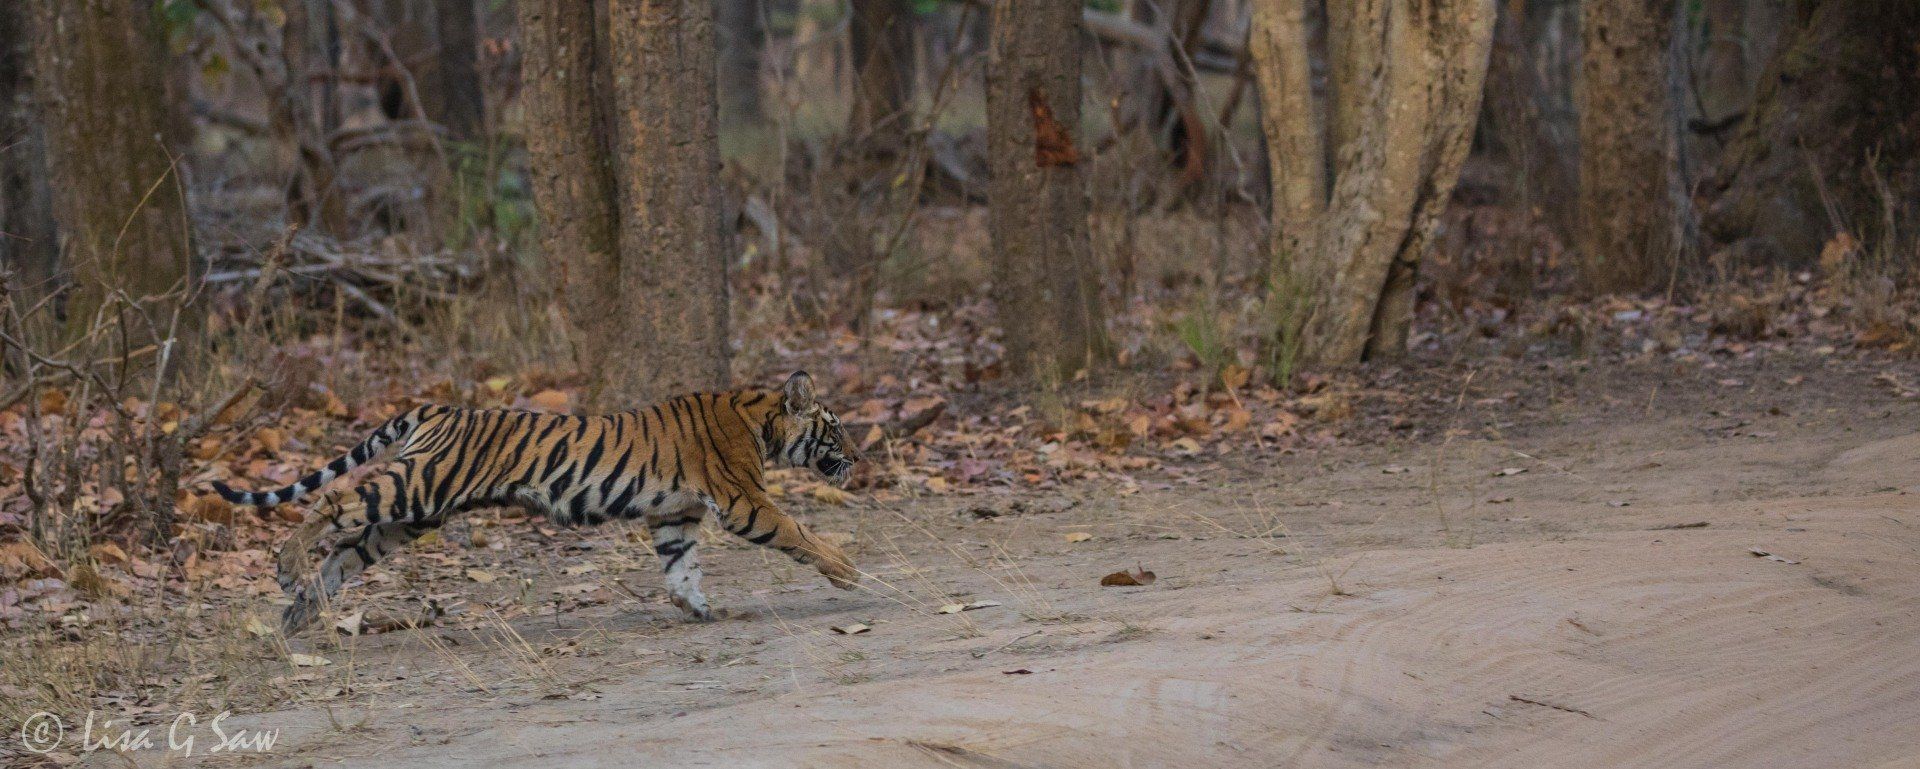 Young tiger running across track